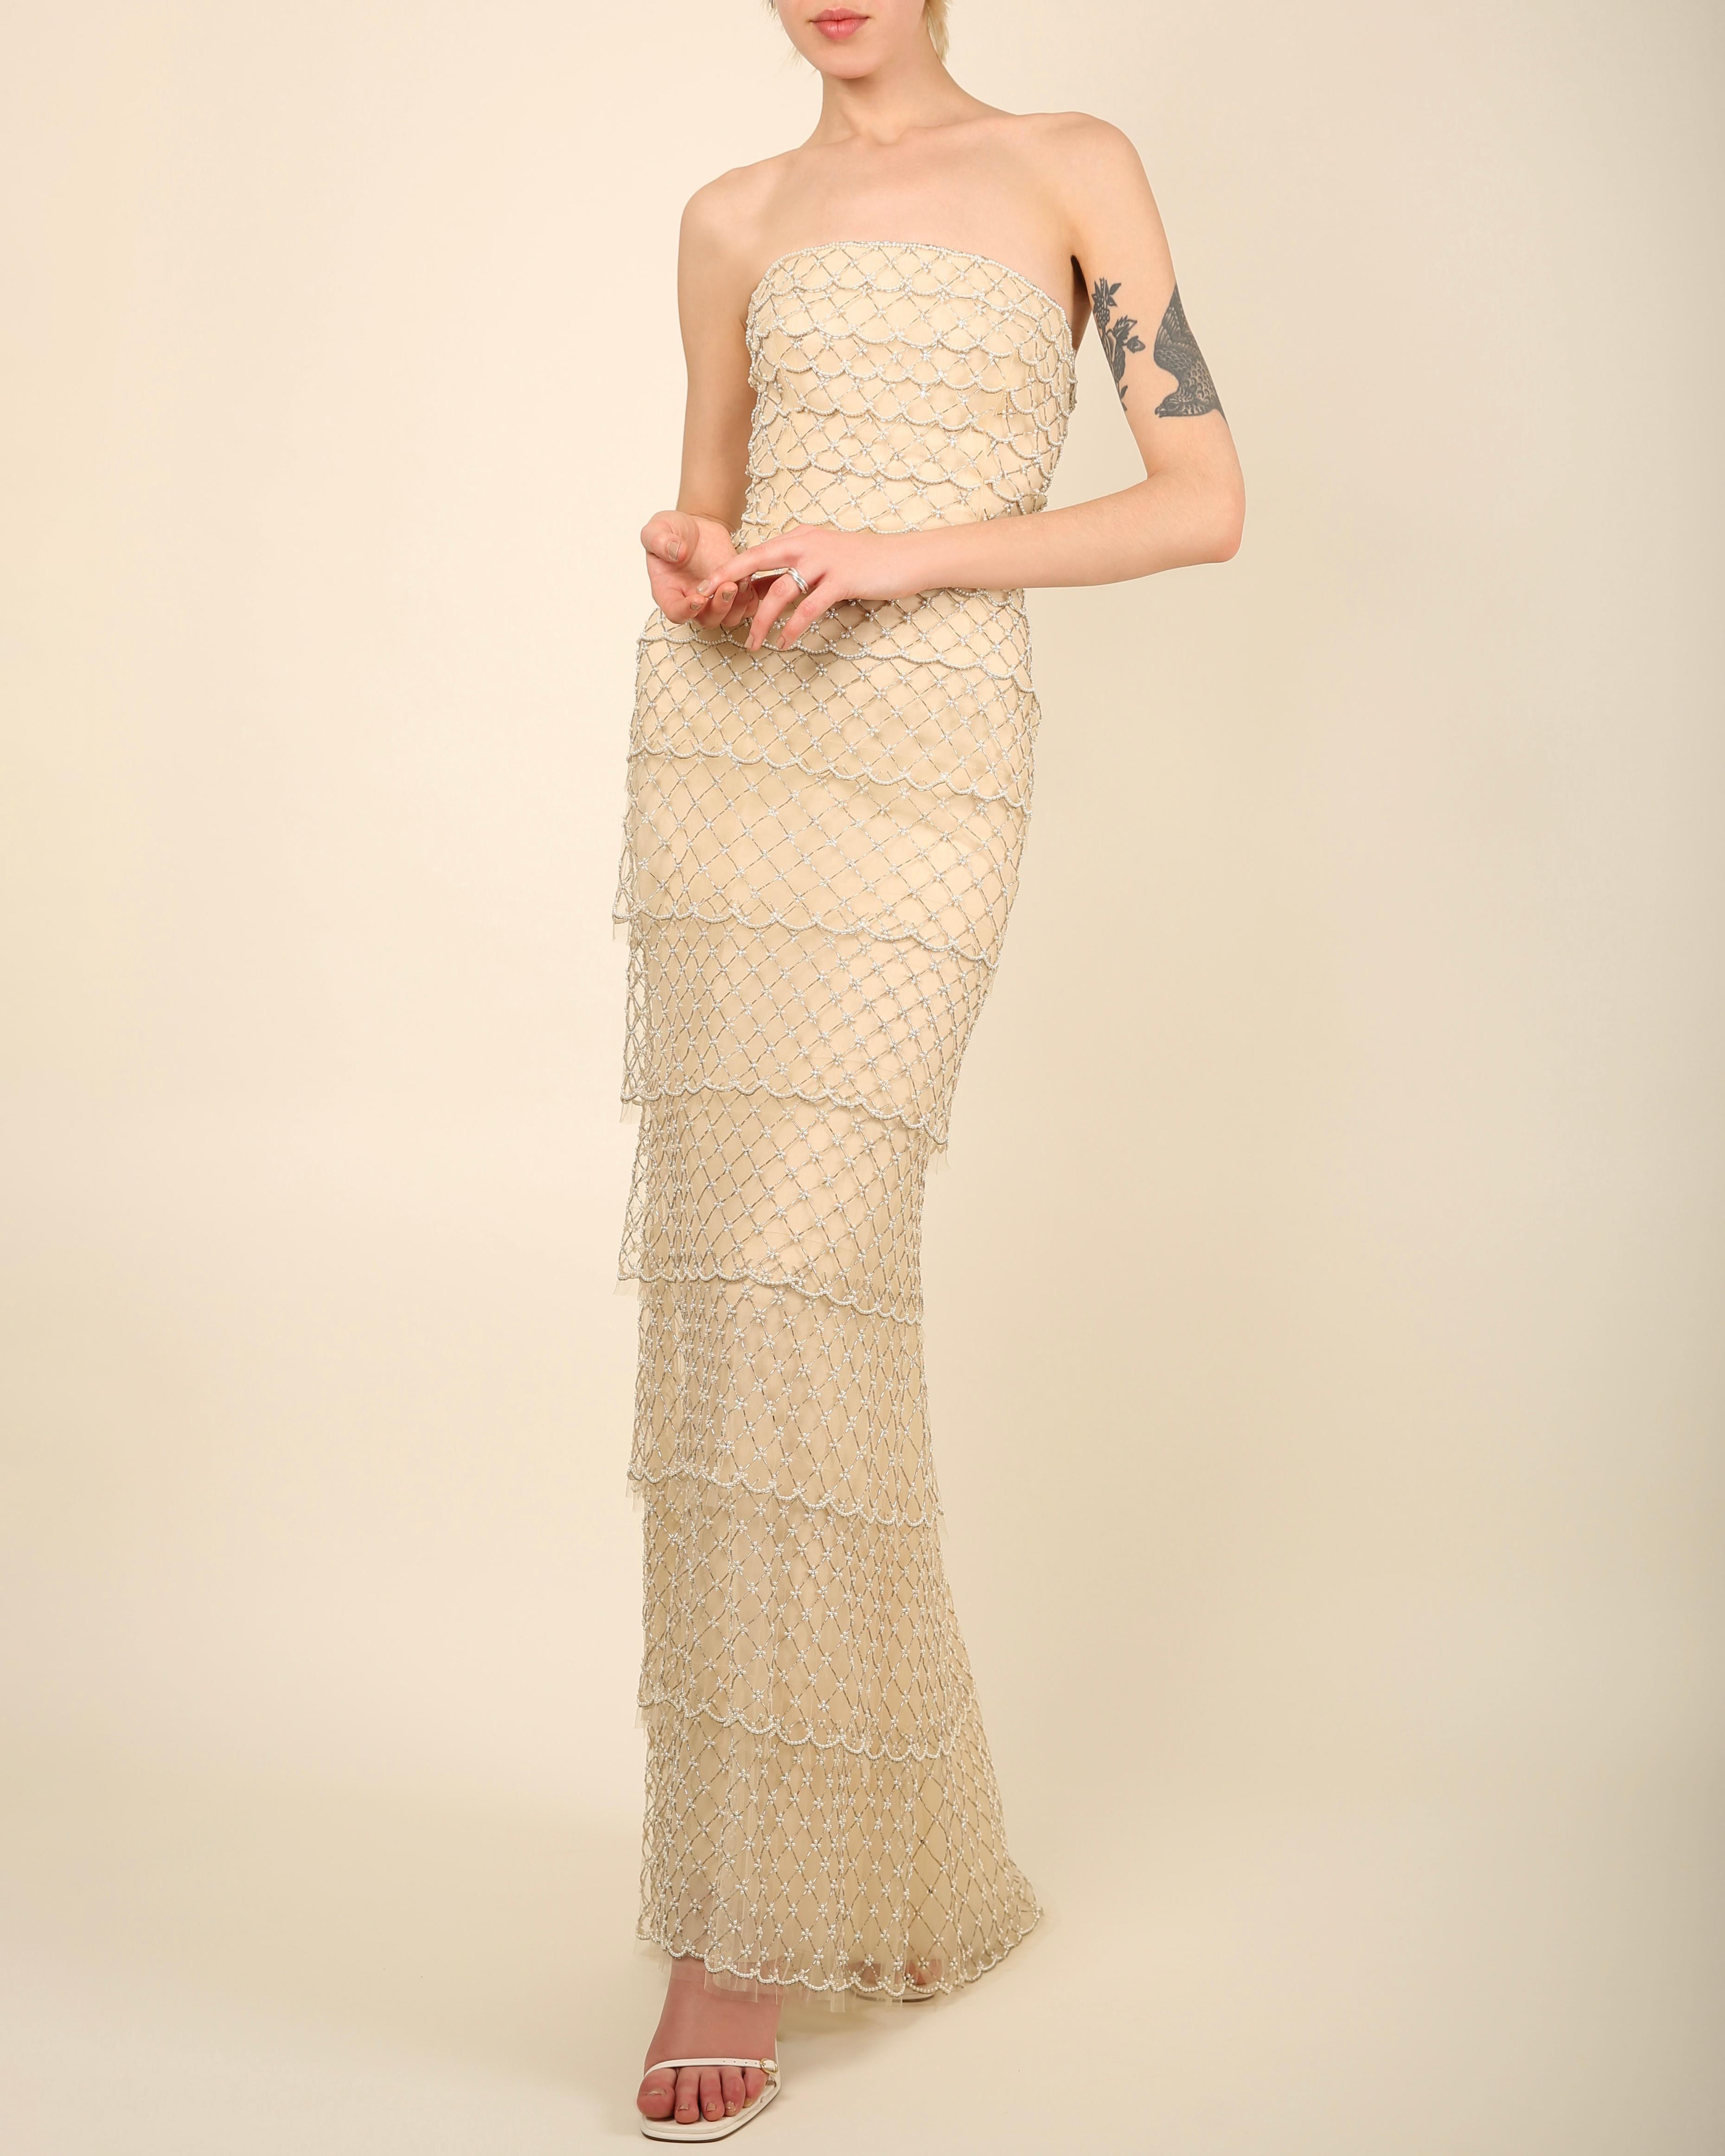 LOVE LALI Vintage

An incredibly rare gown from Oscar de la Renta Spring/Summer 2014
Champagne coloured strapless floor length dress in silk - this would also make an absolutely beautiful wedding gown as an alternative to white
Consists of four